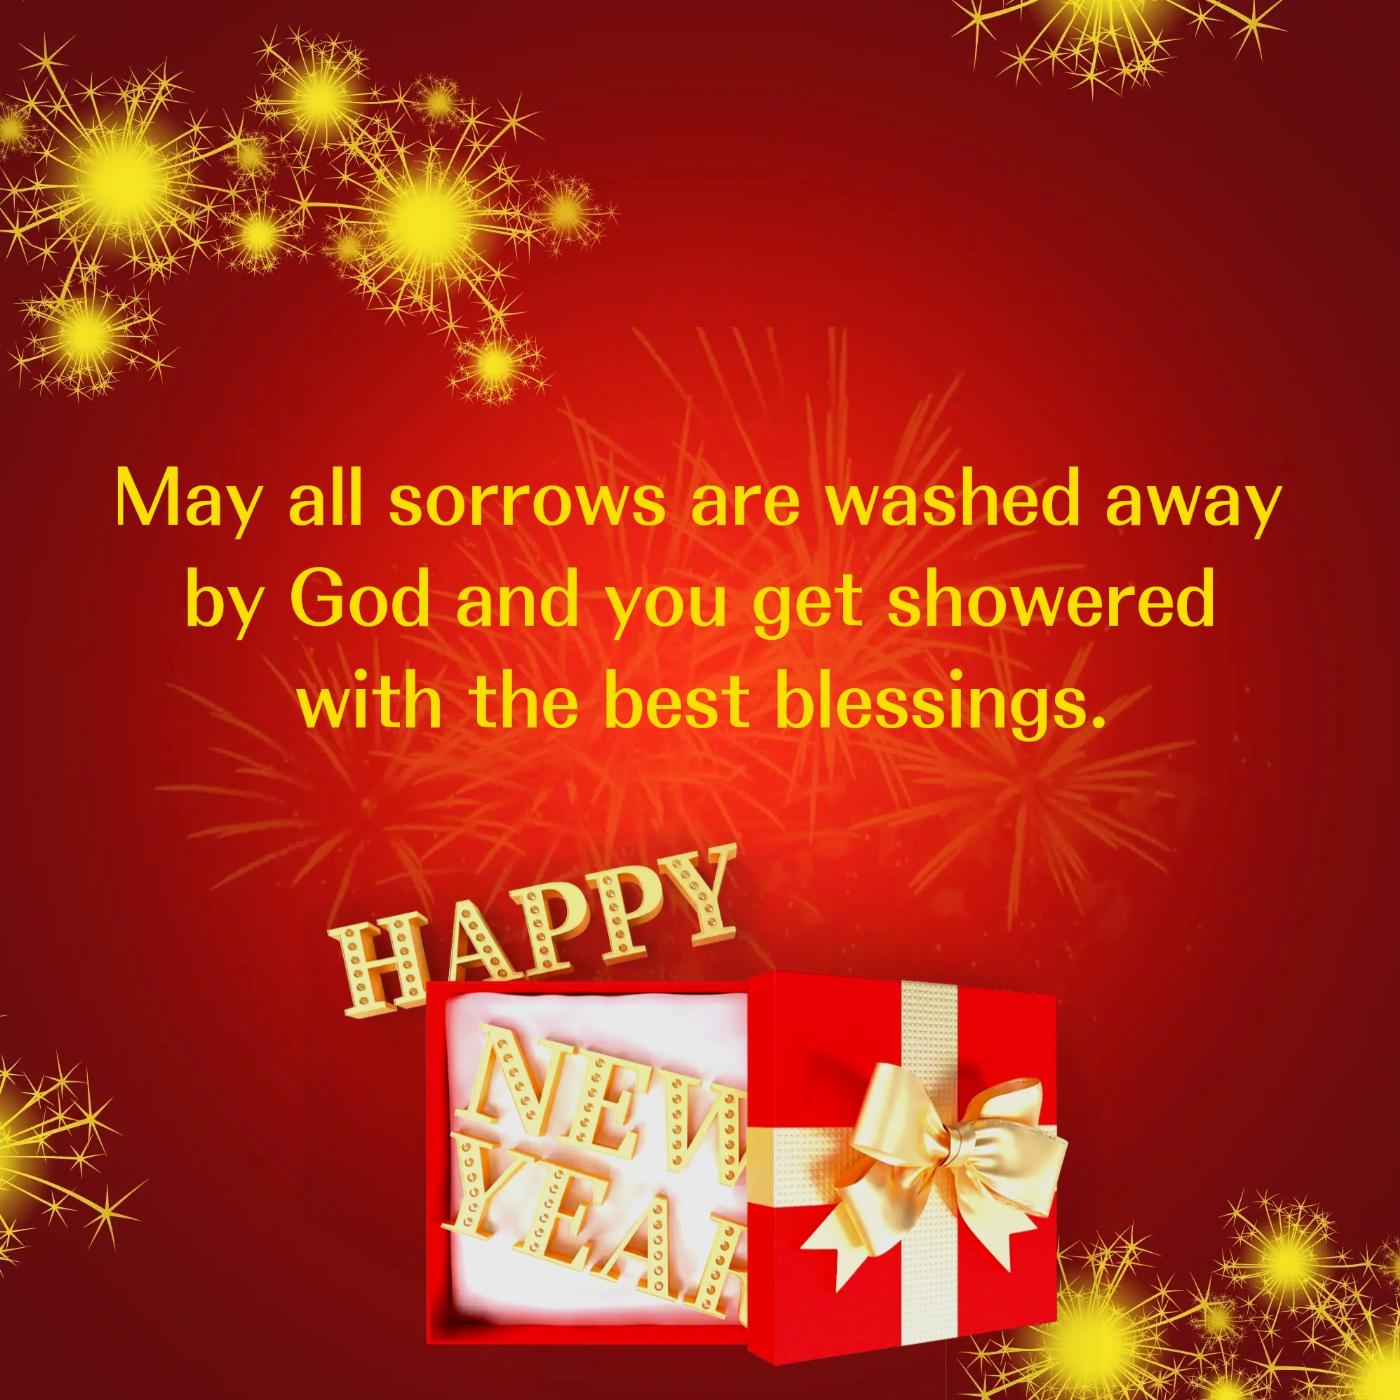 May all sorrows are washed away by God